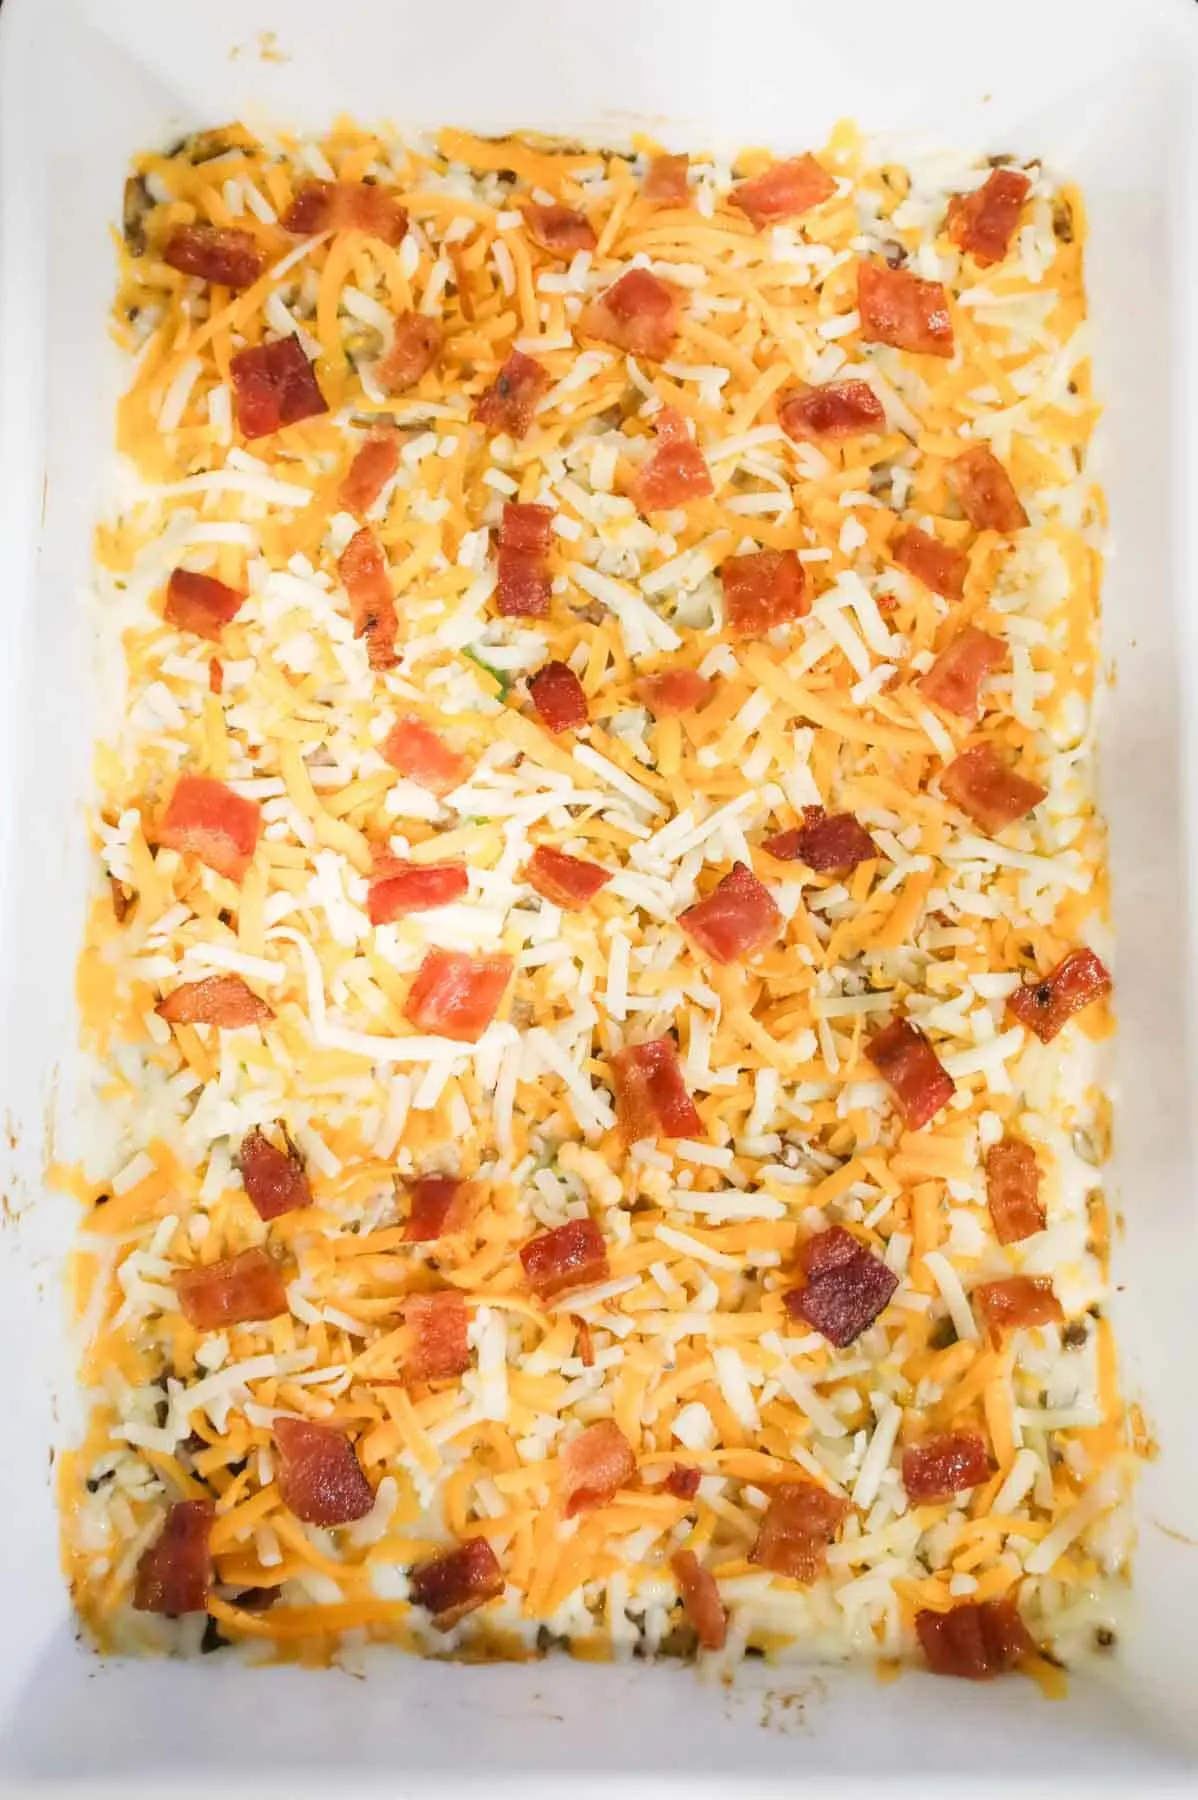 shredded cheese and cooked bacon pieces on top of creamy ground beef and rice mixture in a baking dish